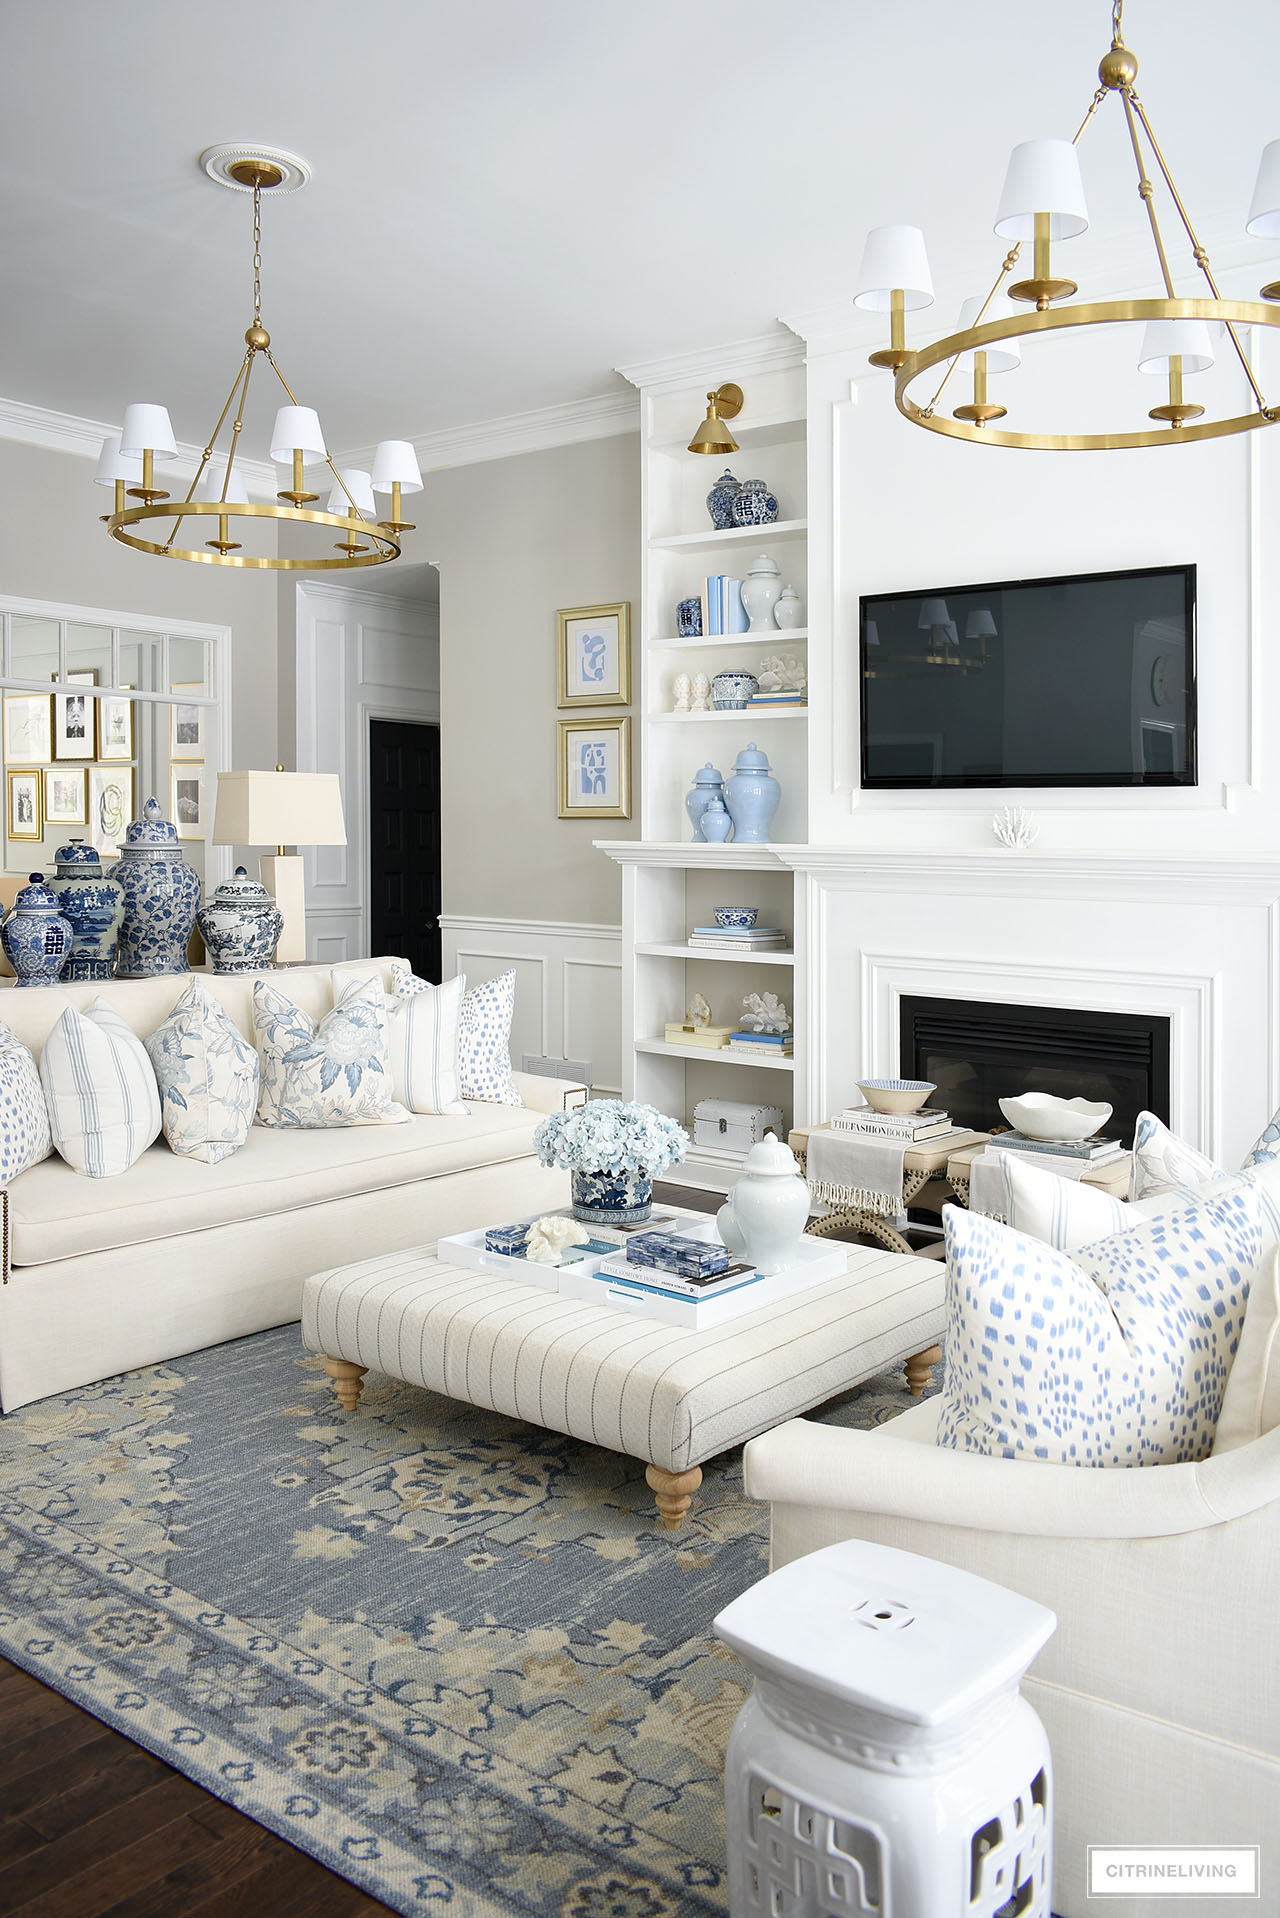 Living room spring decor with pretty blue and white pillows, rug, ginger jars and accessories.